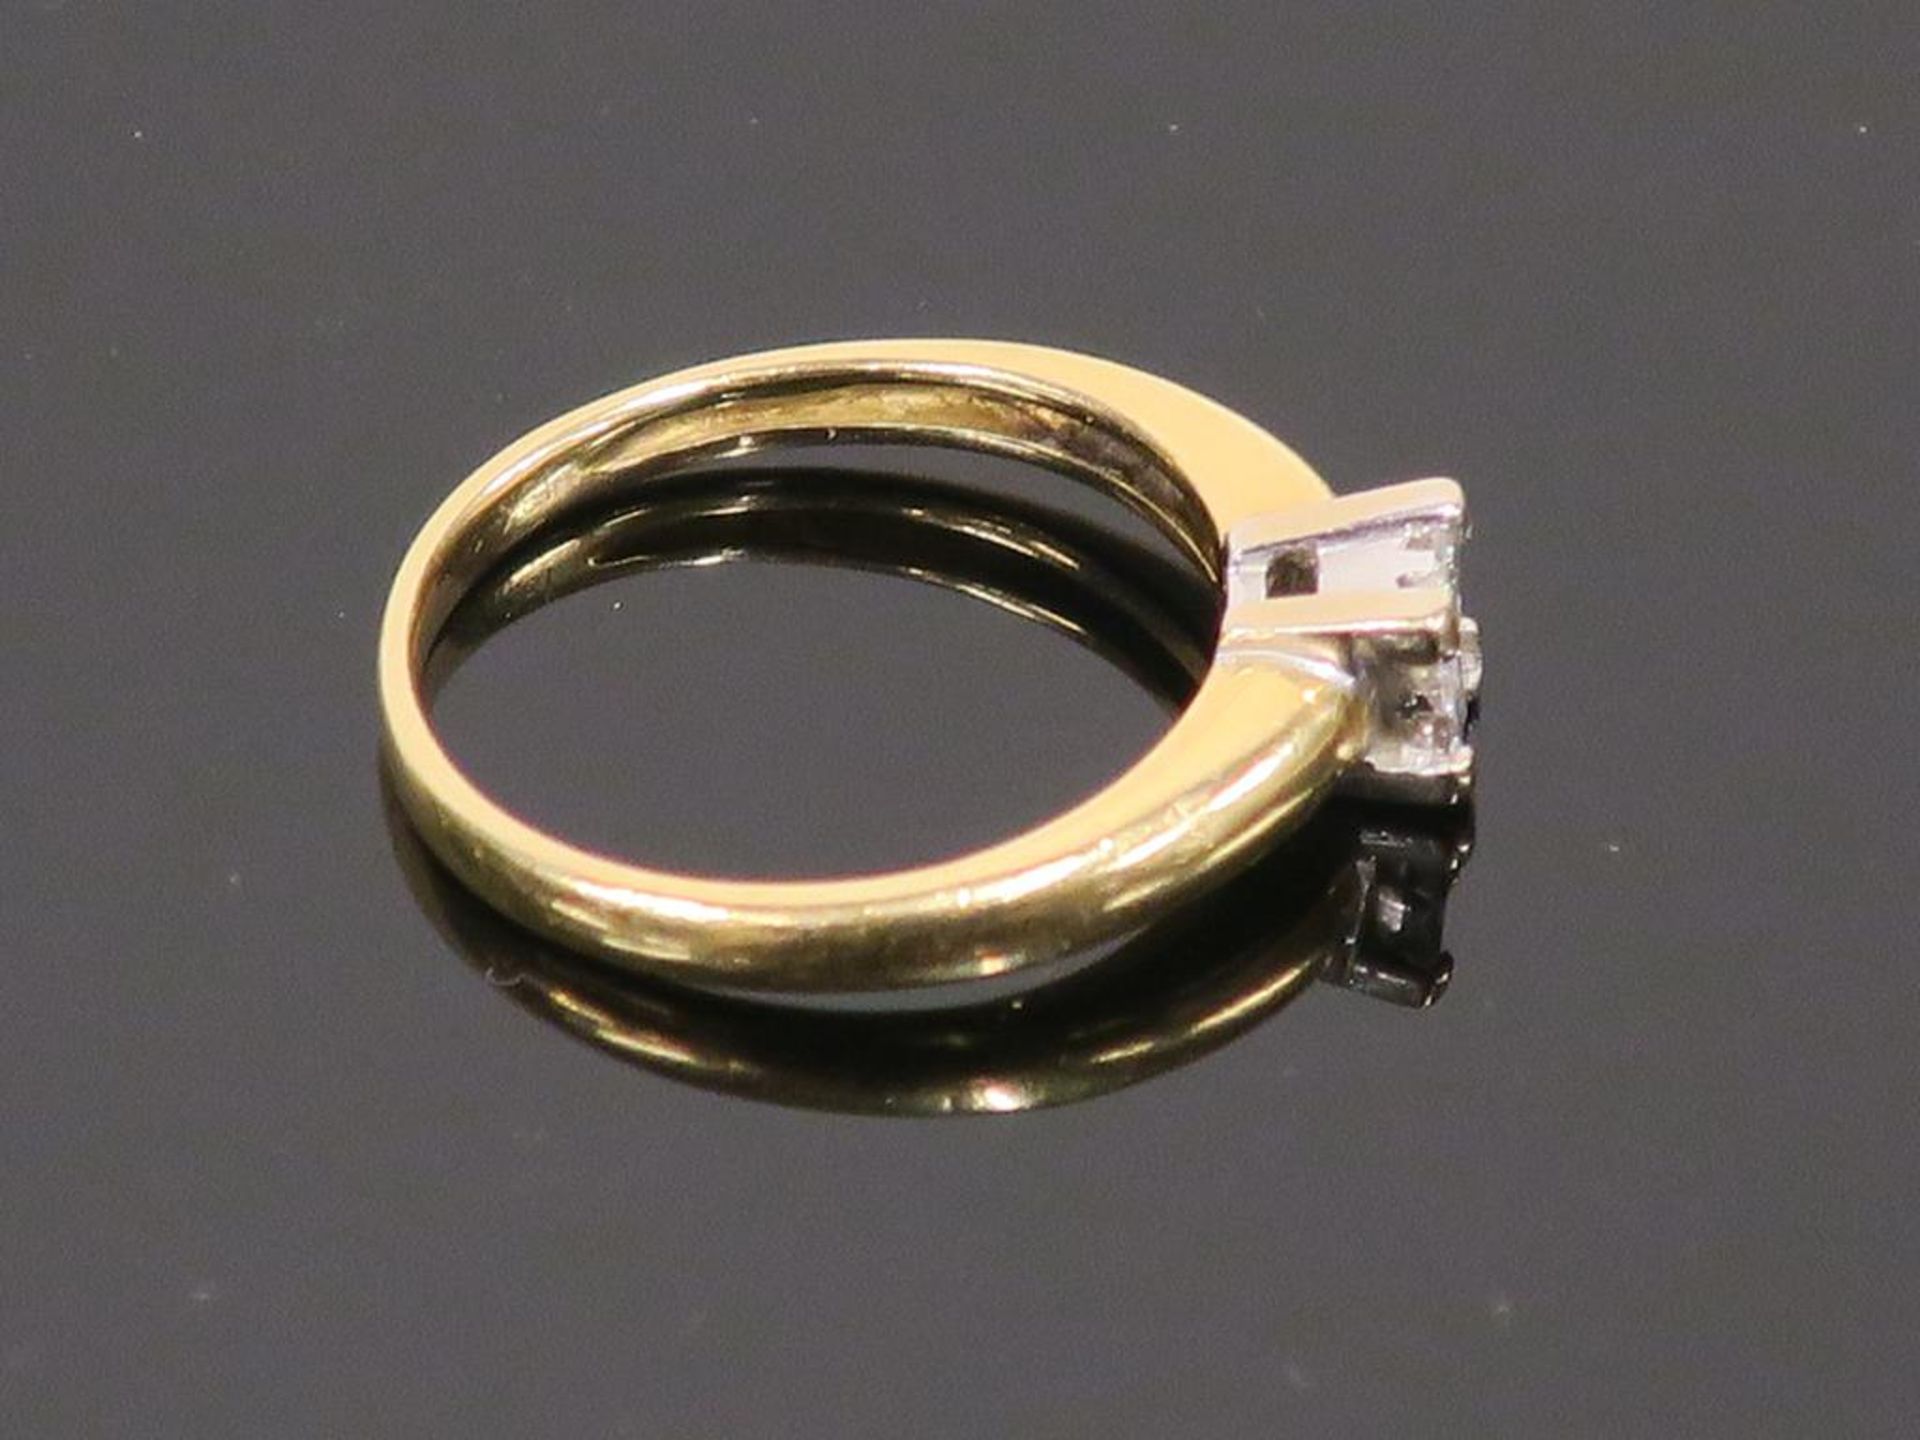 A 9ct Gold Diamond Solitaire Ring size L (weight 2.4g) (est £80-£120) - Image 2 of 3